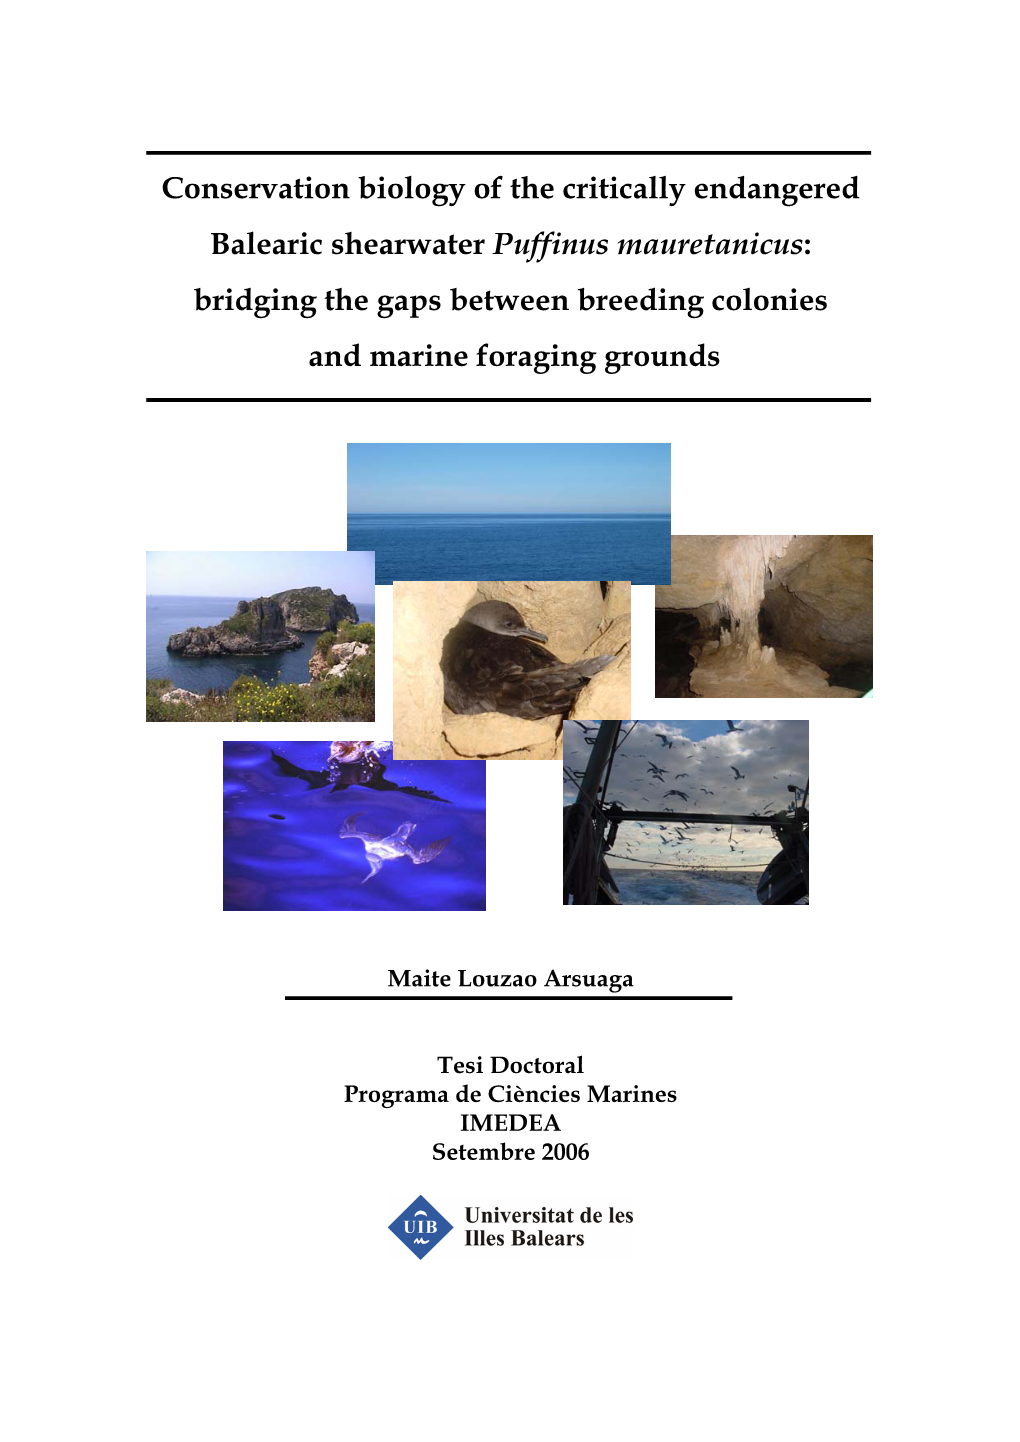 Conservation Biology of the Critically Endangered Balearic Shearwater Puffinus Mauretanicus: Bridging the Gaps Between Breeding Colonies and Marine Foraging Grounds